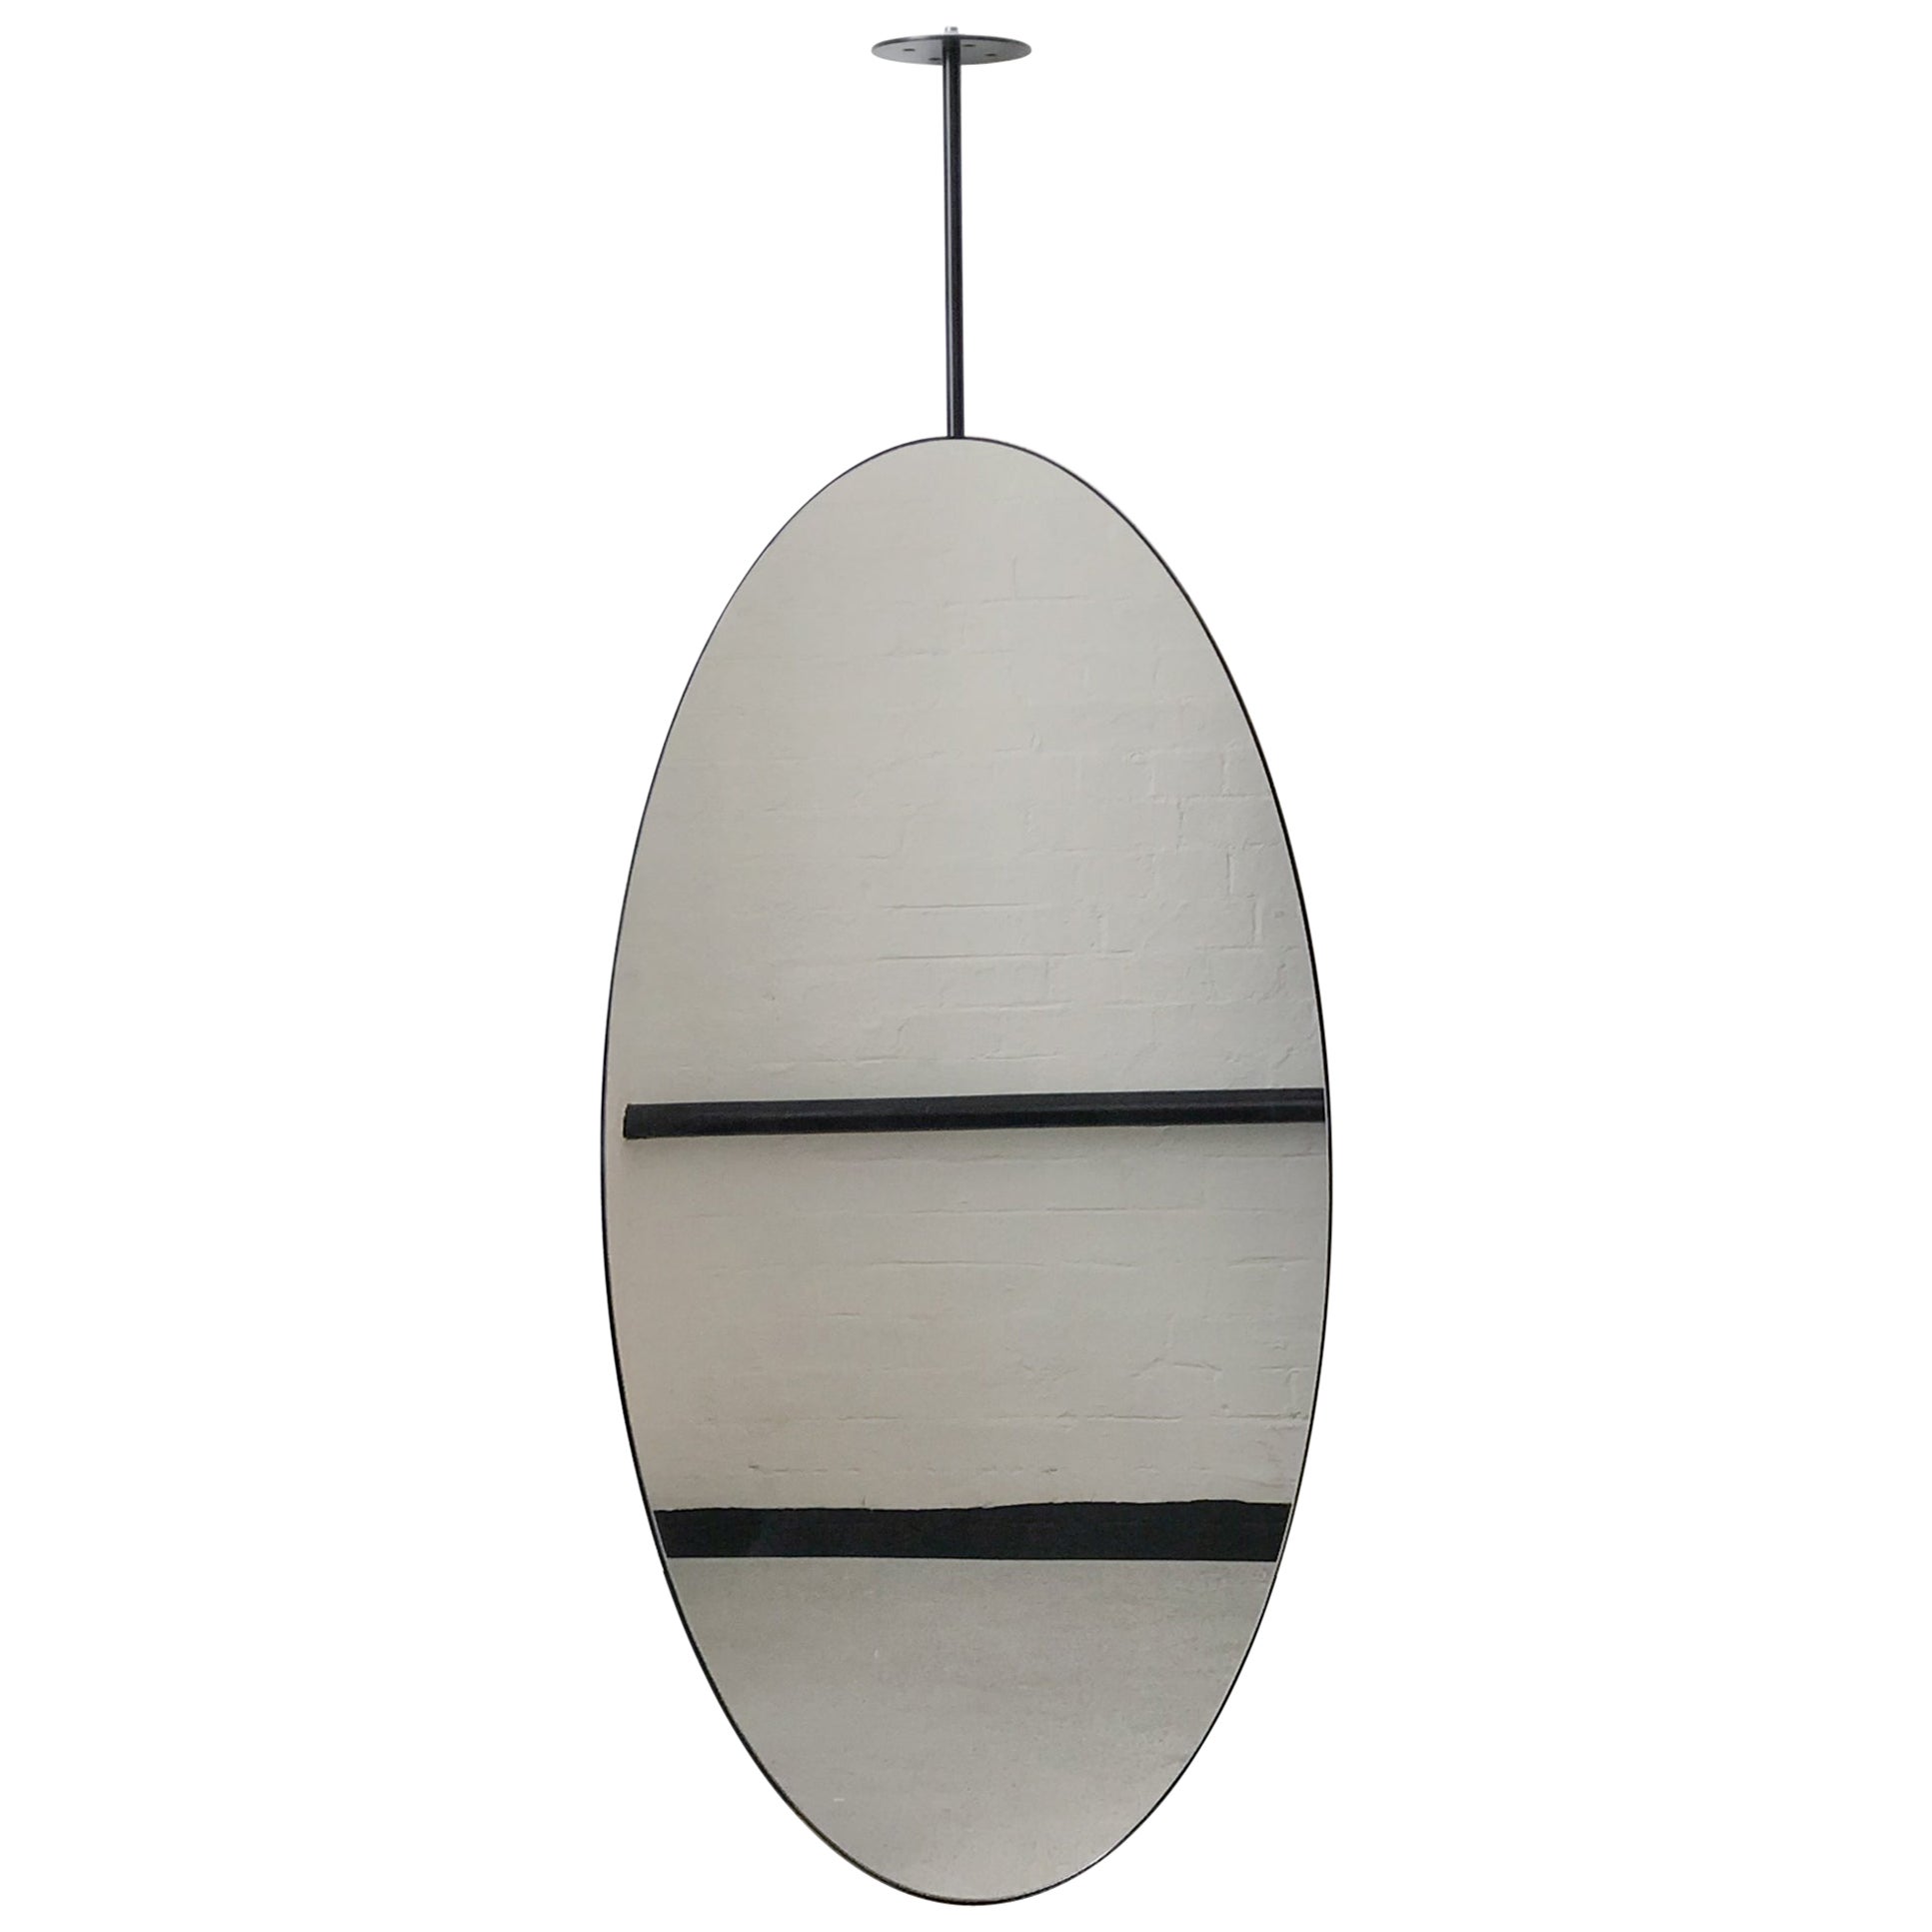 Ovalis Ceiling Suspended Oval Shaped Mirror with Matte Black Frame